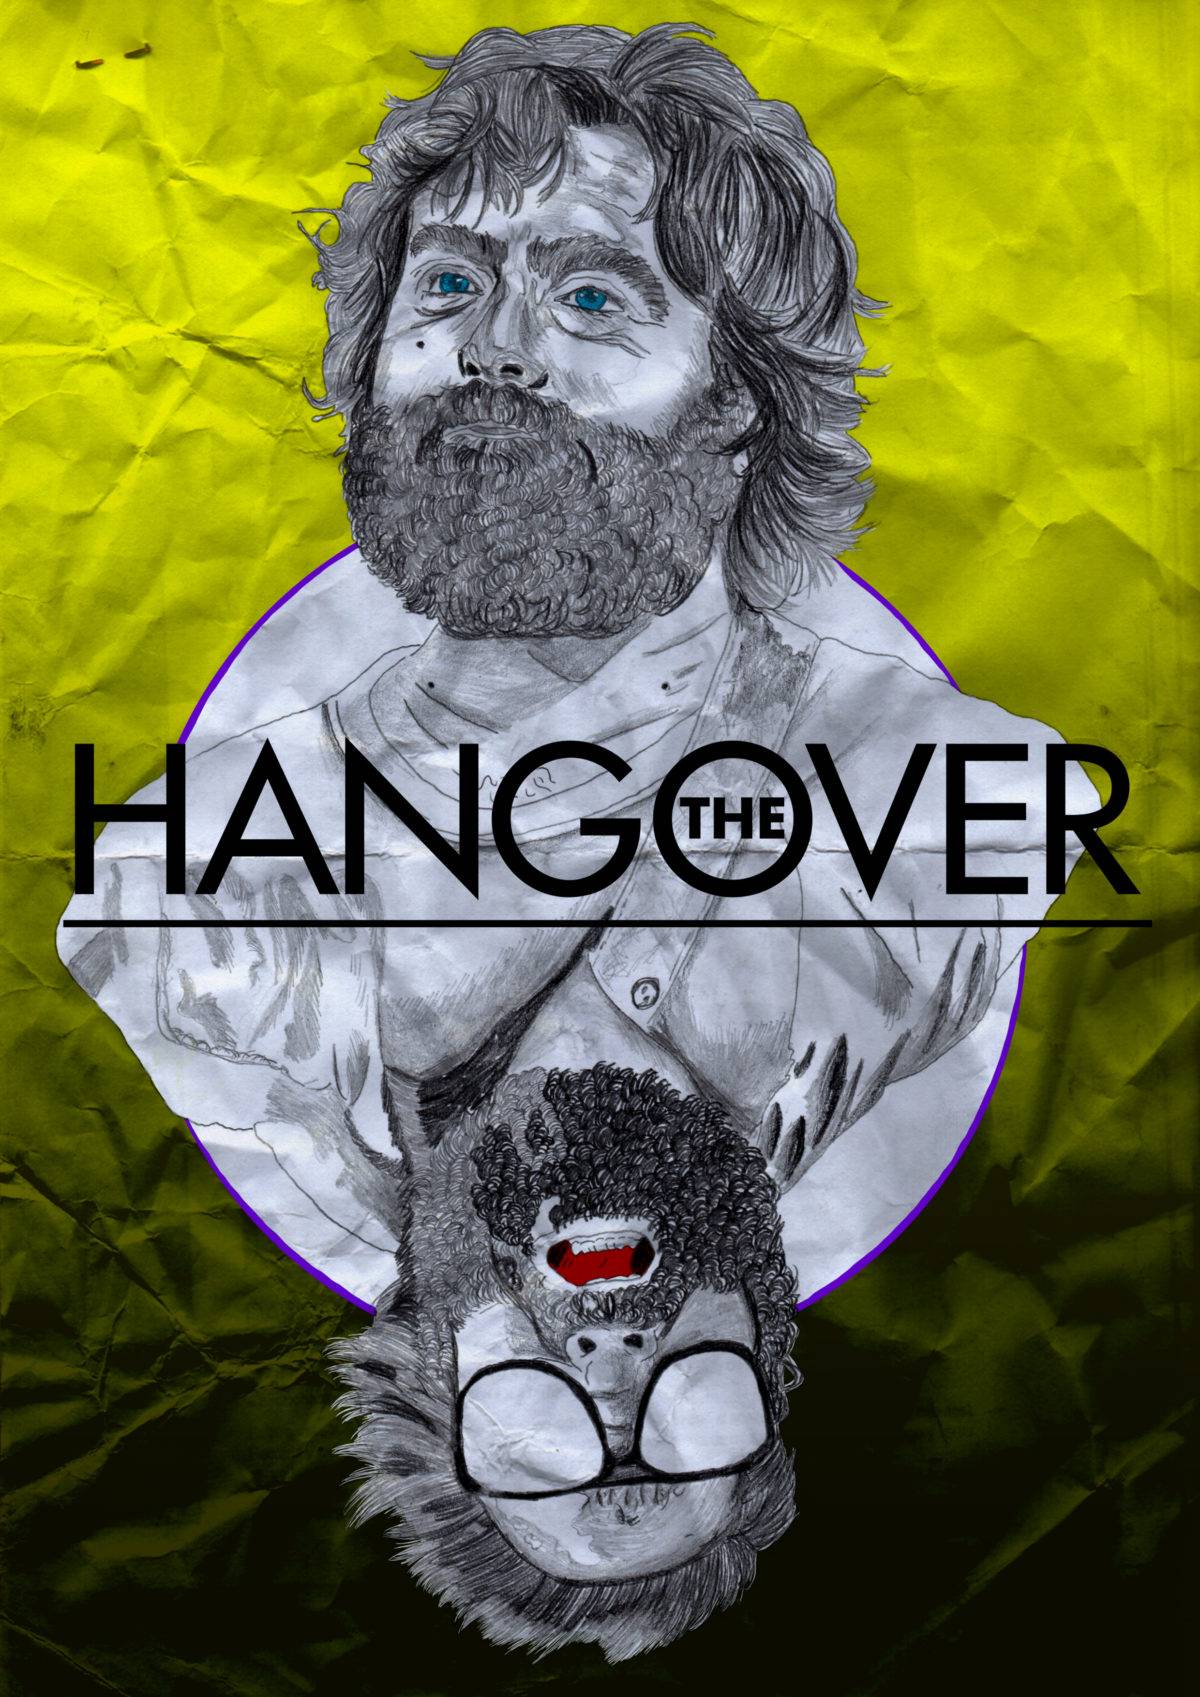 The Hangover. Poster.